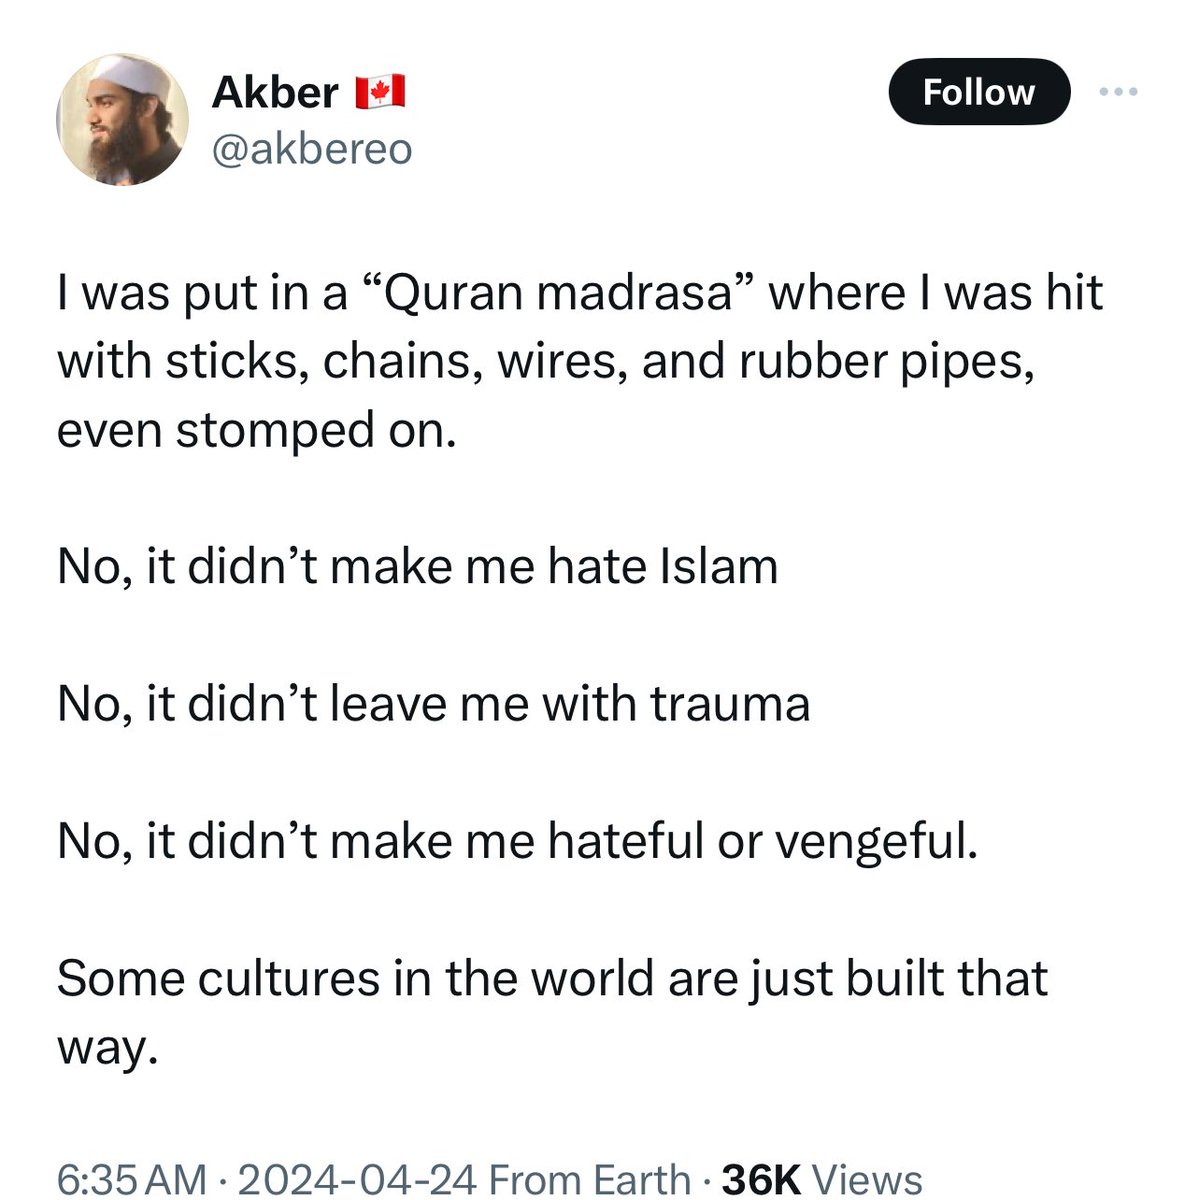 This misguided individual @akbereo really thought this was an amazing tweet His madrasa is ruining the name of Islam and this tweet makes it seem as if all this is permissible! This man needs to fear Allah